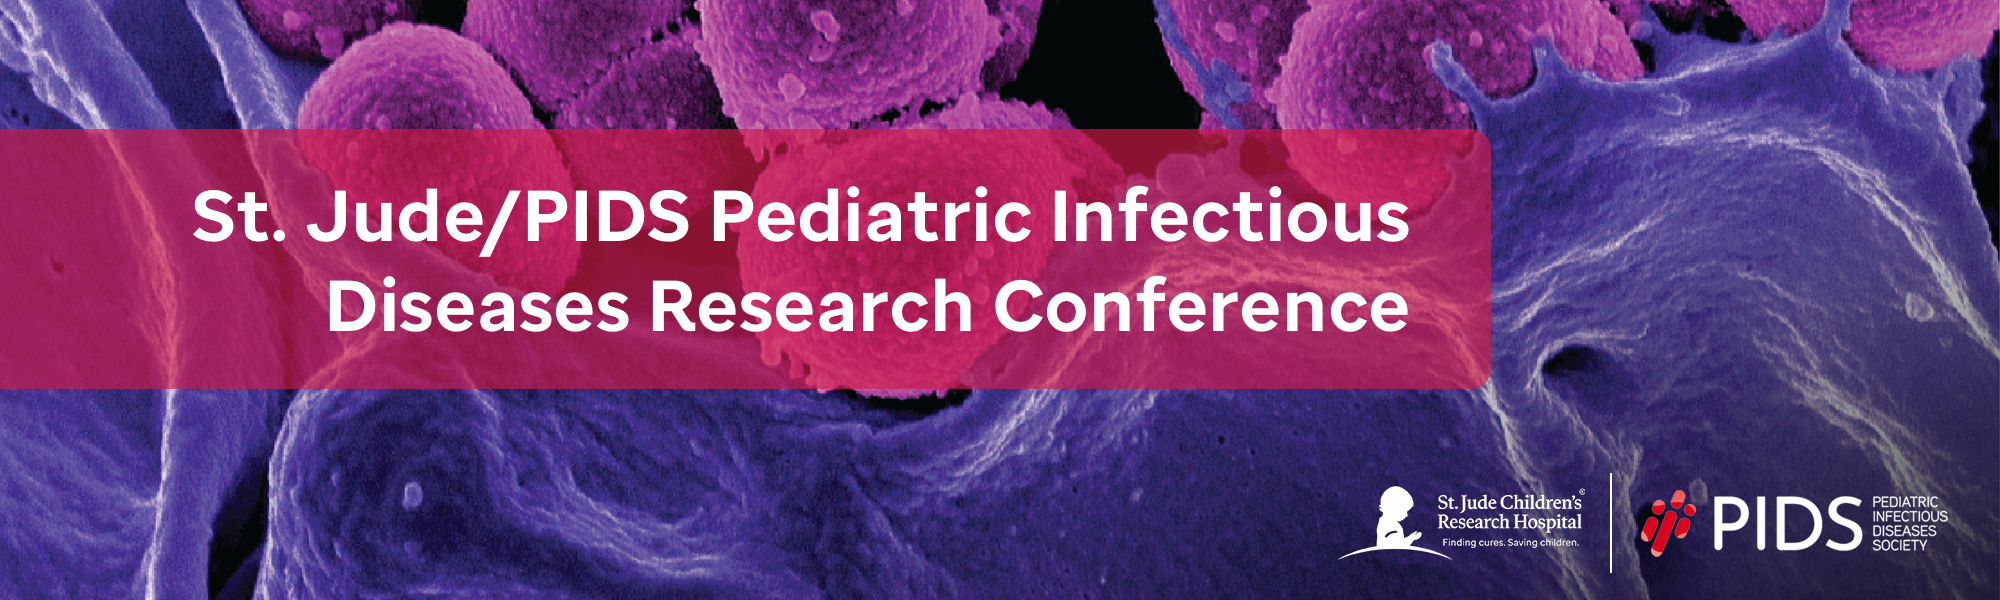 St. Jude/PIDS Pediatric Infectious Diseases Research Conference